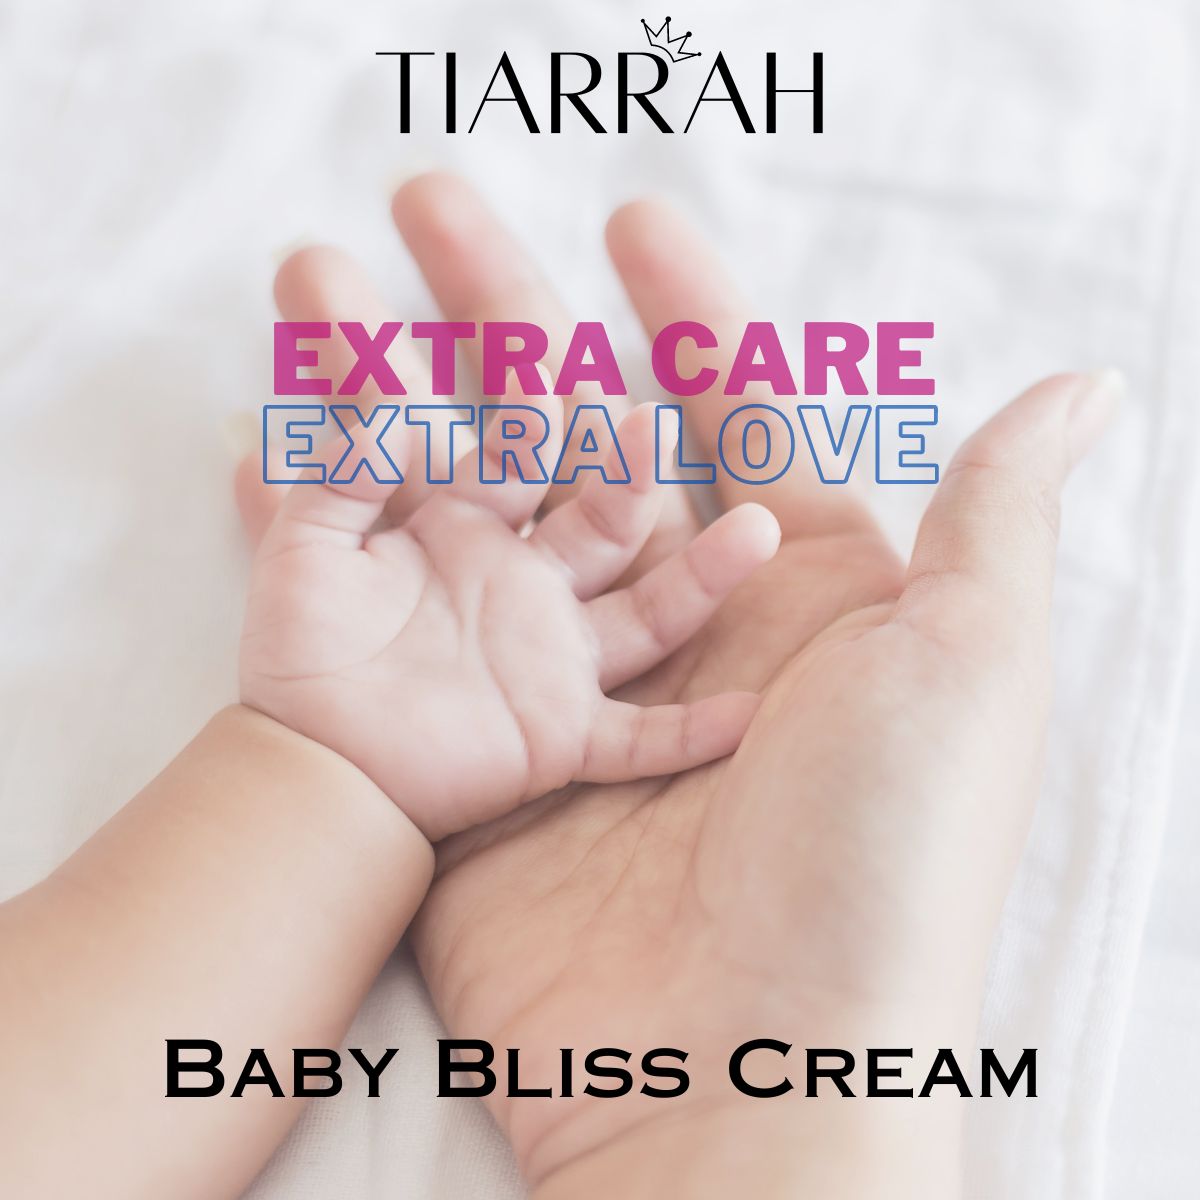 Tiarrah's Baby Bliss Cream: Pure, Safe, Gentle - The Luxury Bath and Body Care Shop